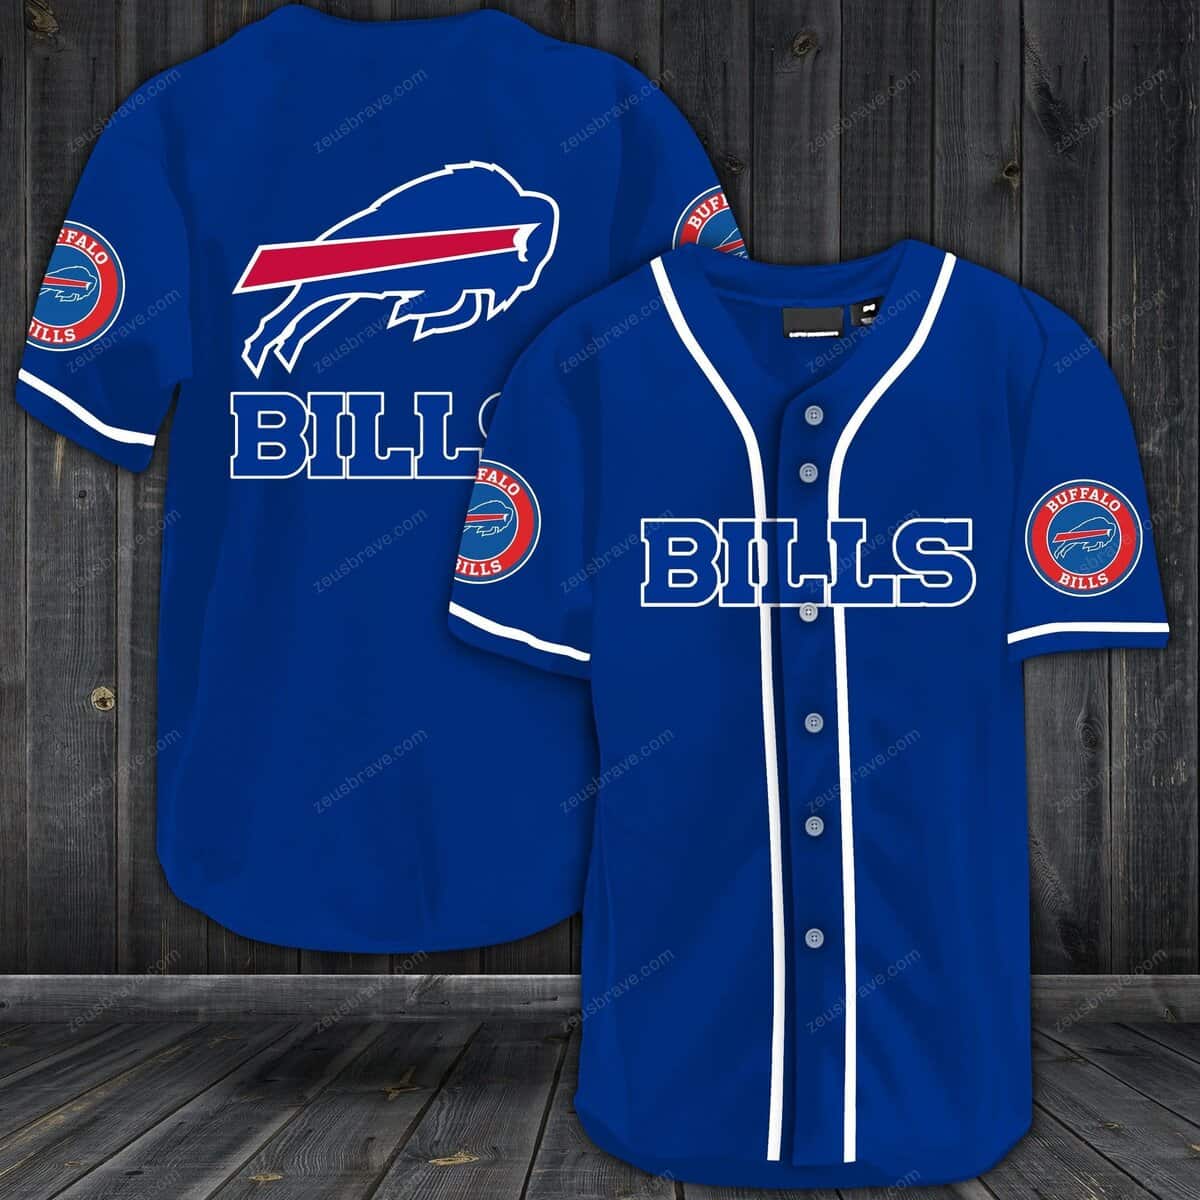 NFL Buffalo Bills Baseball Jersey Gift For Son From Dad